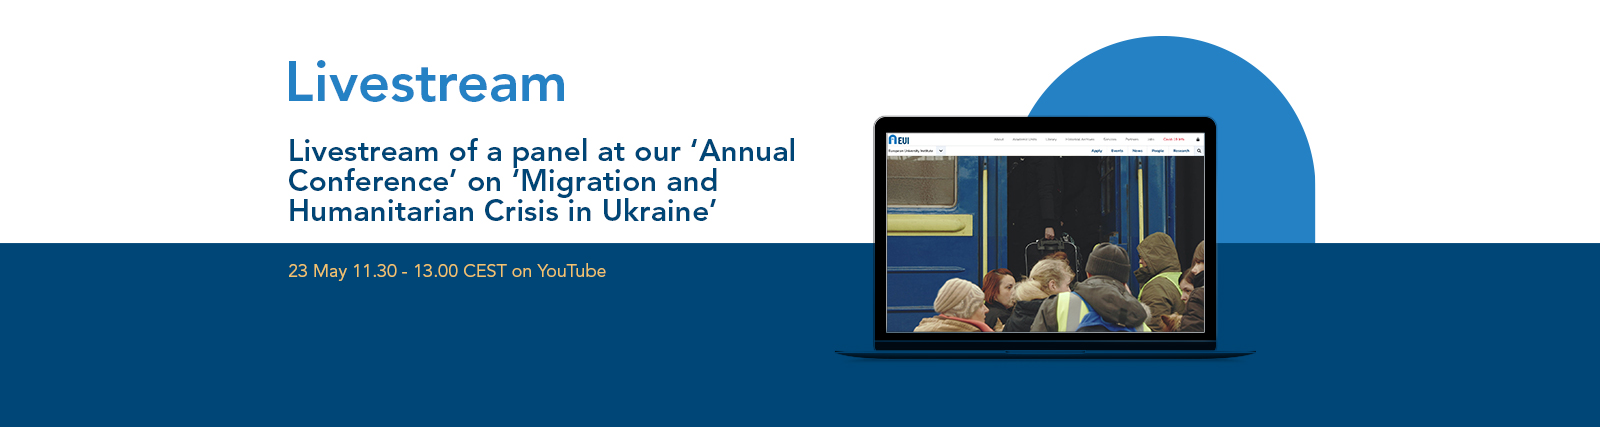 Permalink to:Join the livestream of a panel at our ‘Annual Conference’ on ‘Migration and Humanitarian Crisis in Ukraine’